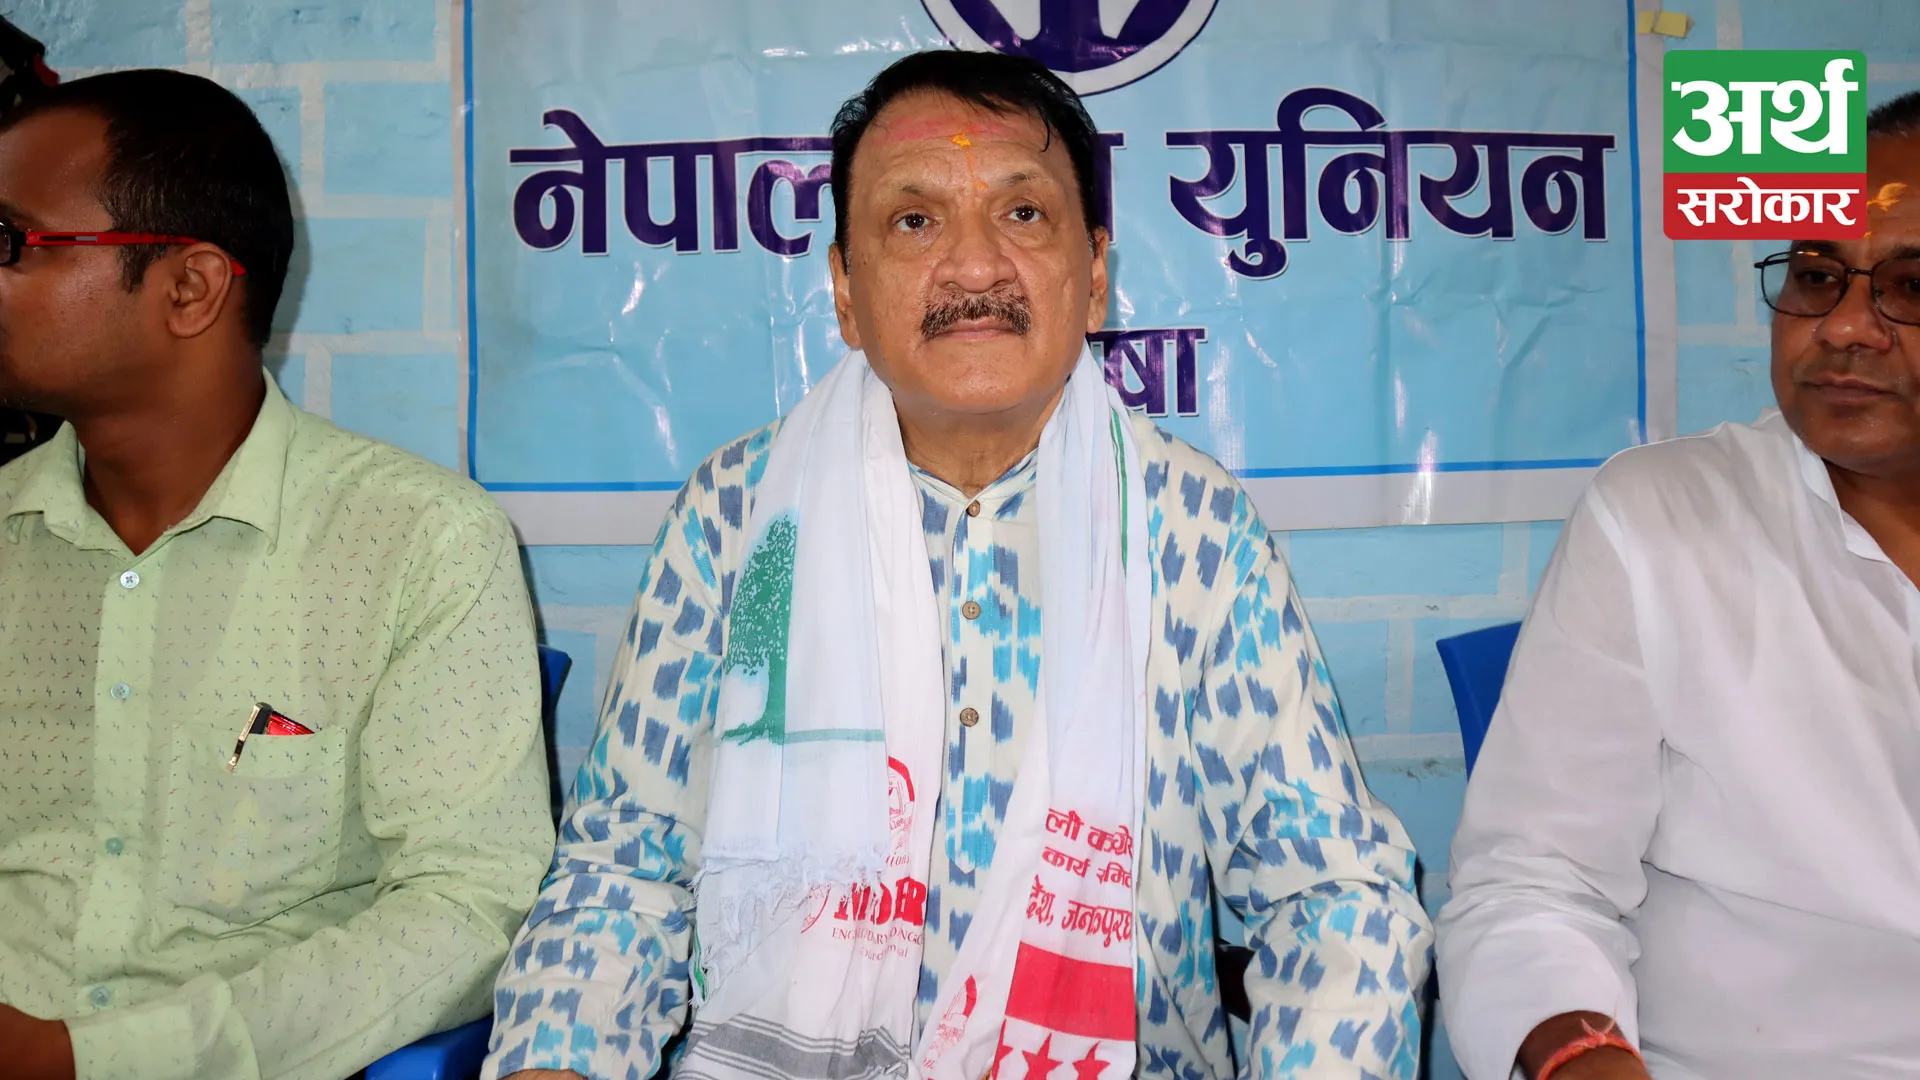 Minister Mahat accuses UML of obstructing parliament unnecessarily